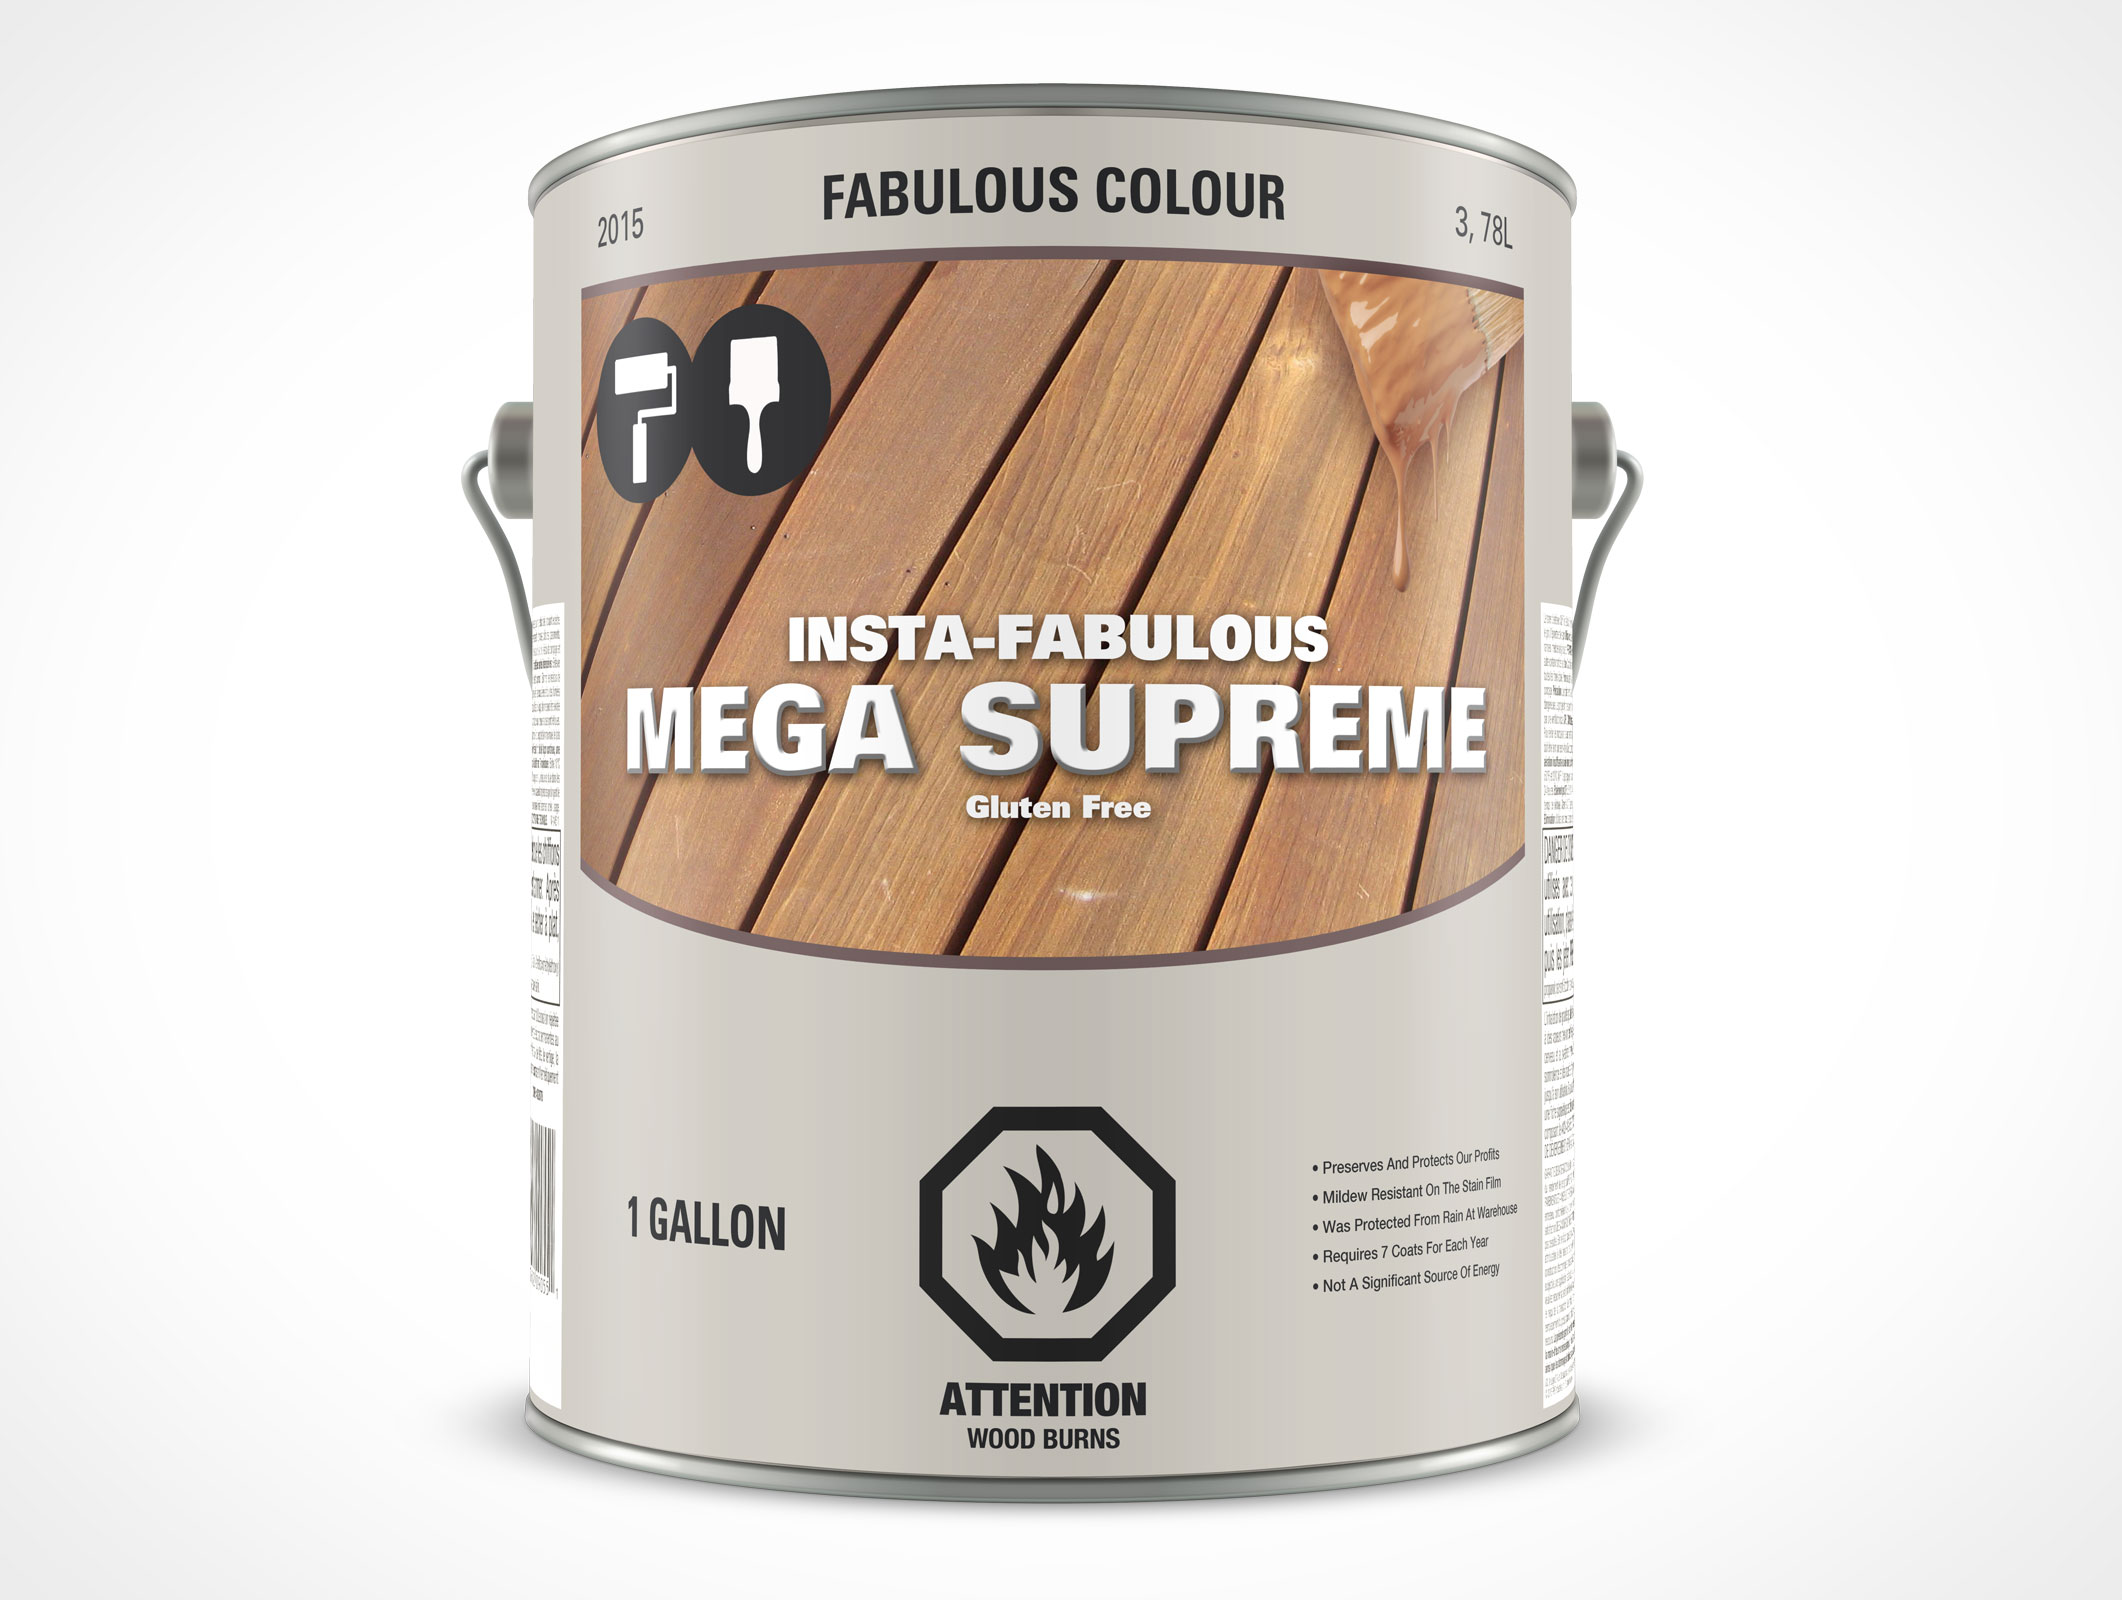 1 Gallon Paint Can Mockup 22r5